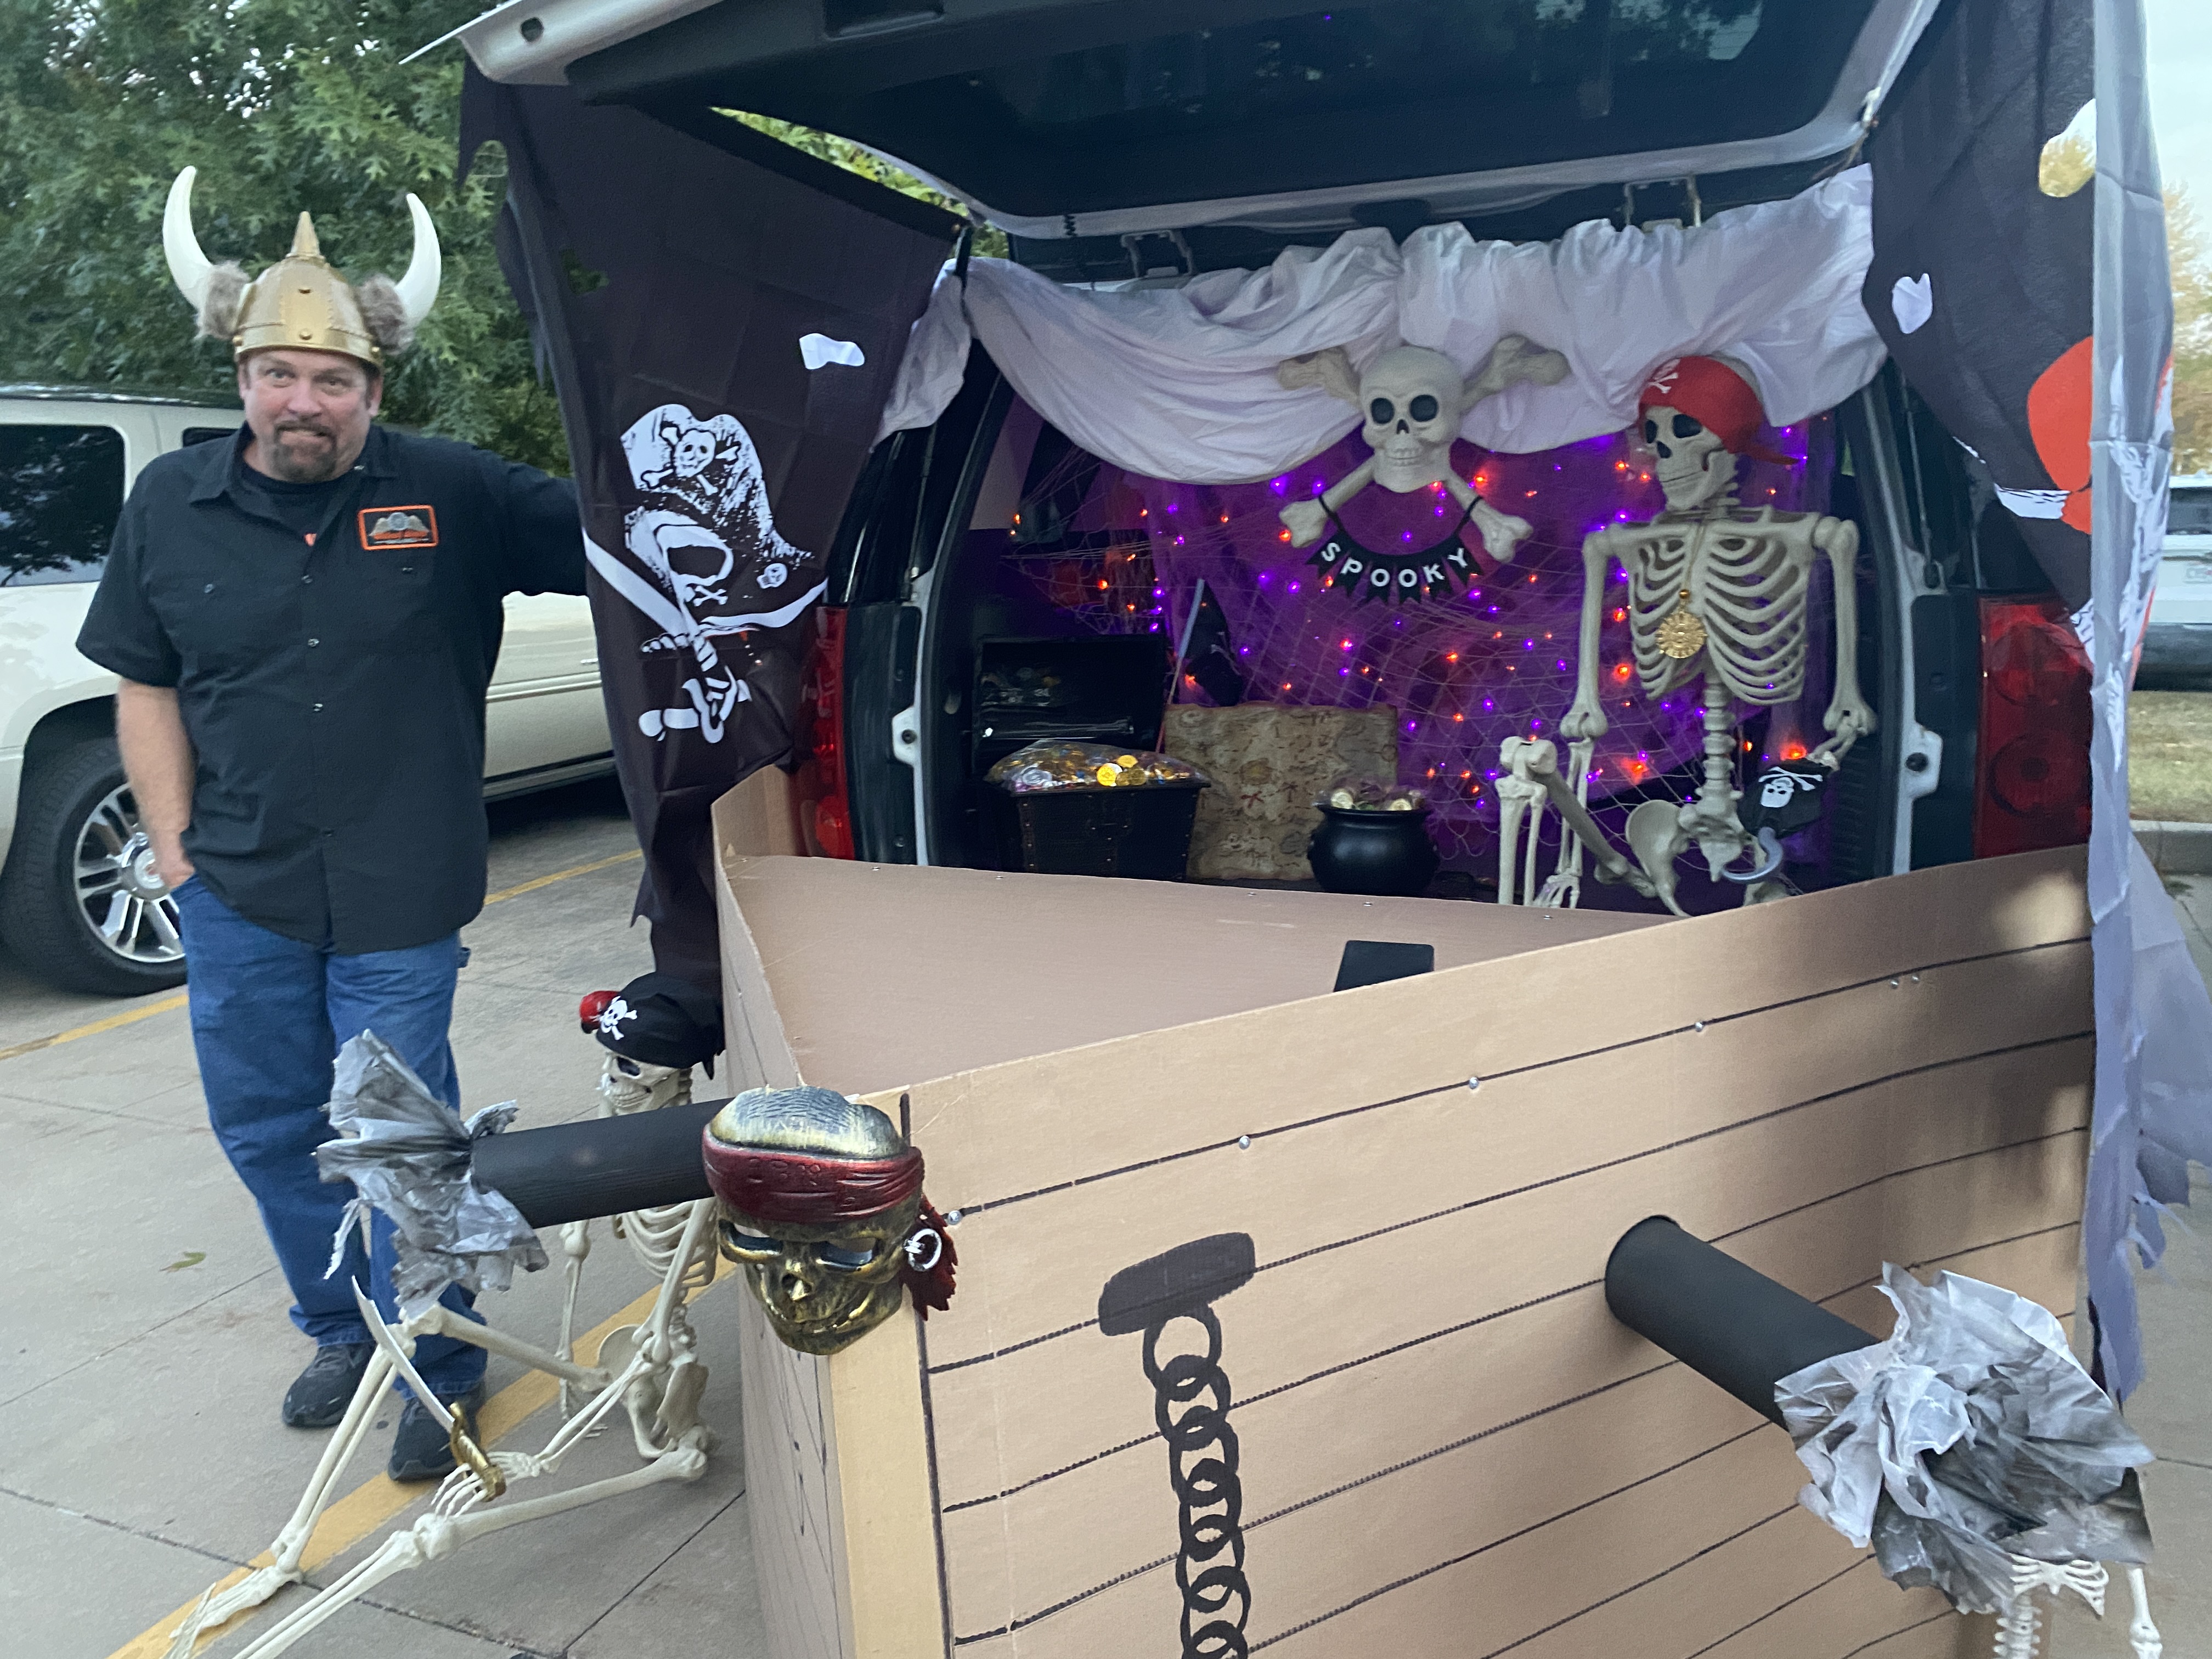 Trunk or Treat